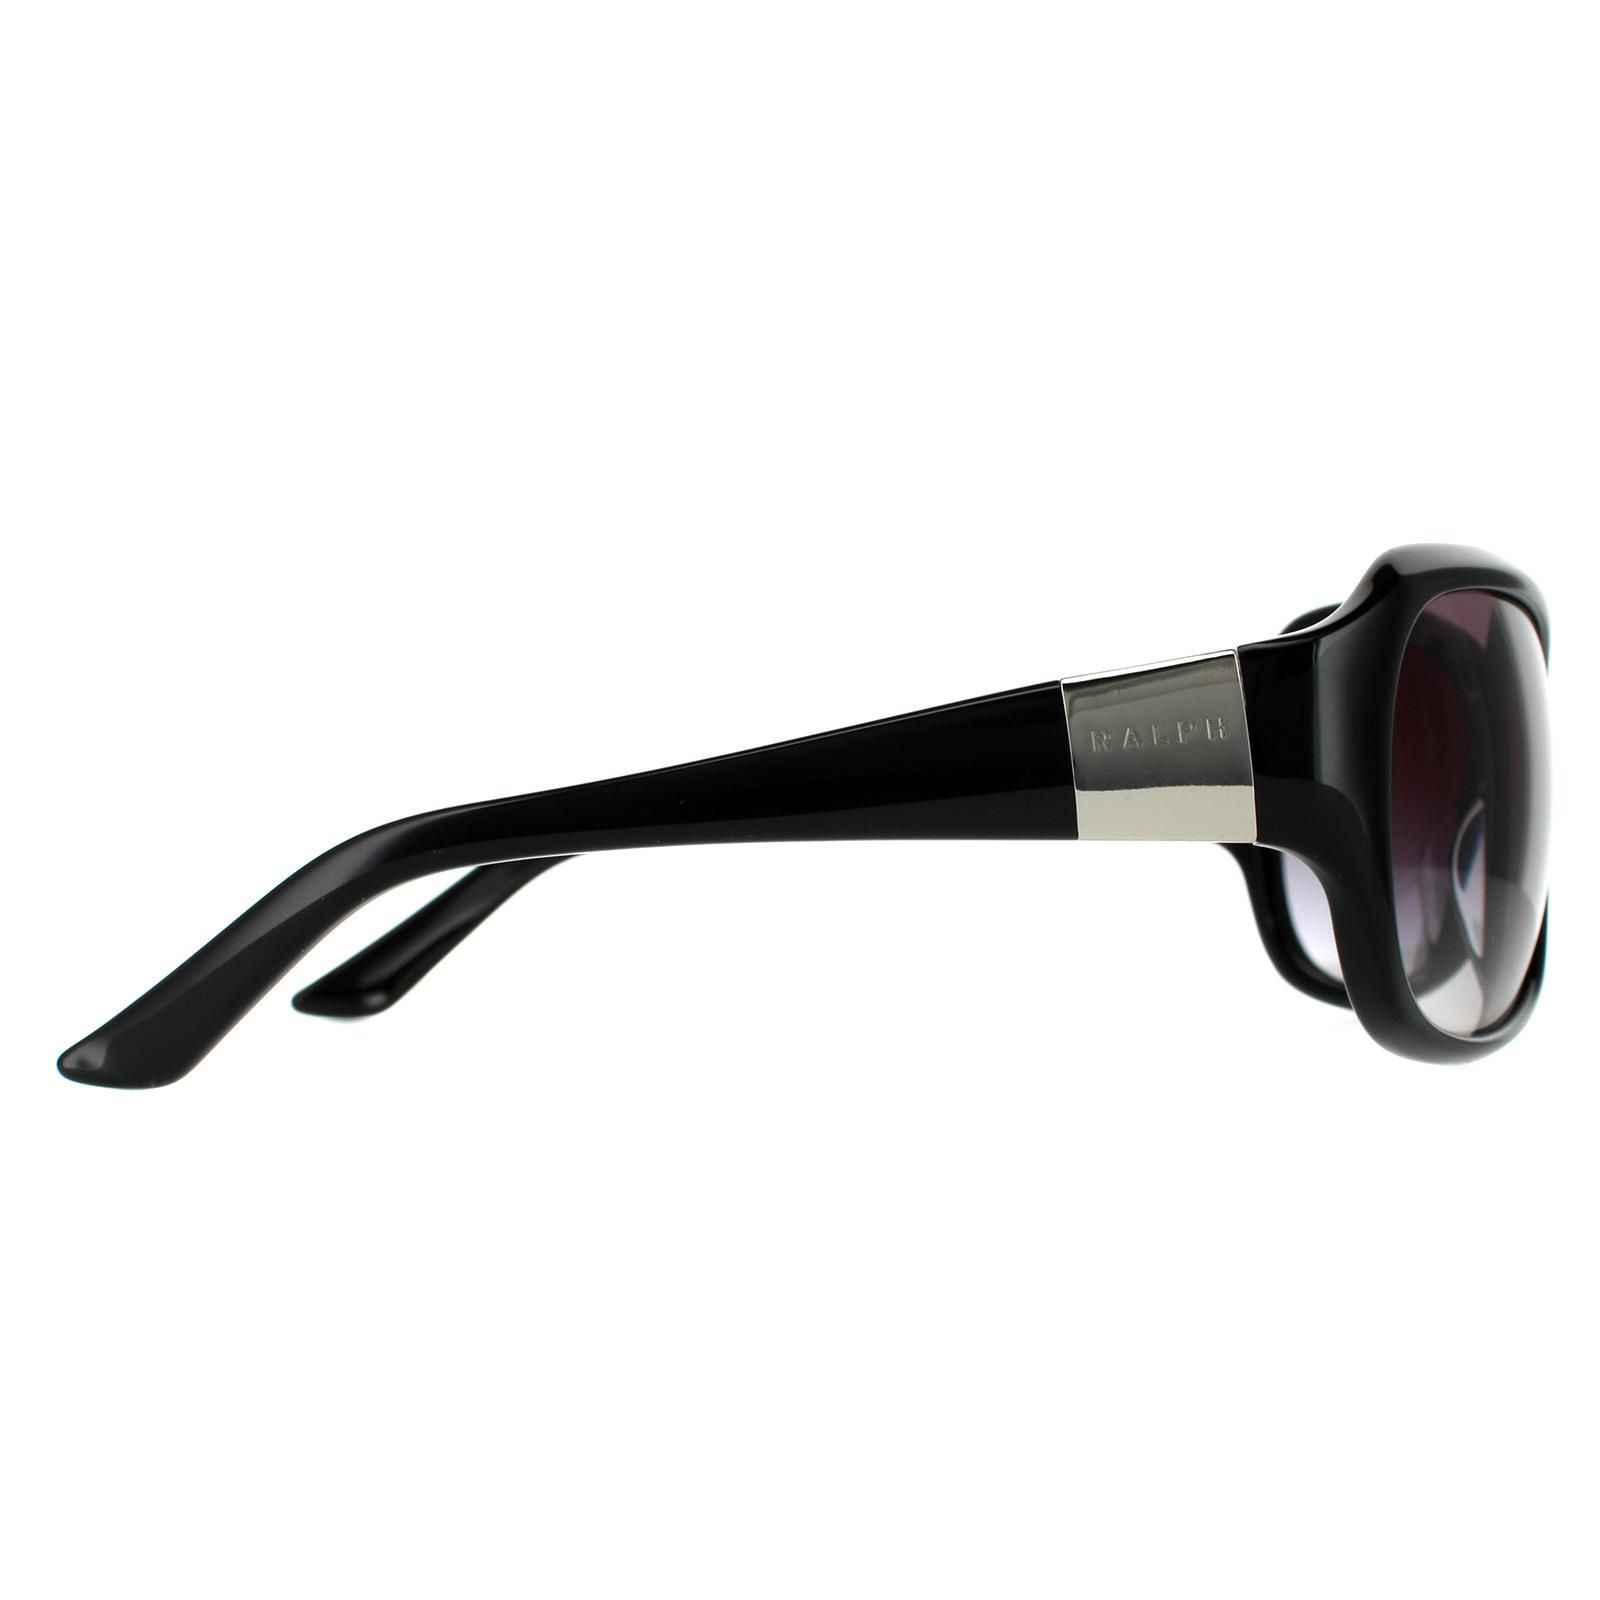 Ralph by Ralph Lauren Oval Womens Black Grey Gradient Sunglasses Ralph by Ralph Lauren are a stylish oval shape with wide tapering arms and Ralph logo on the temples.